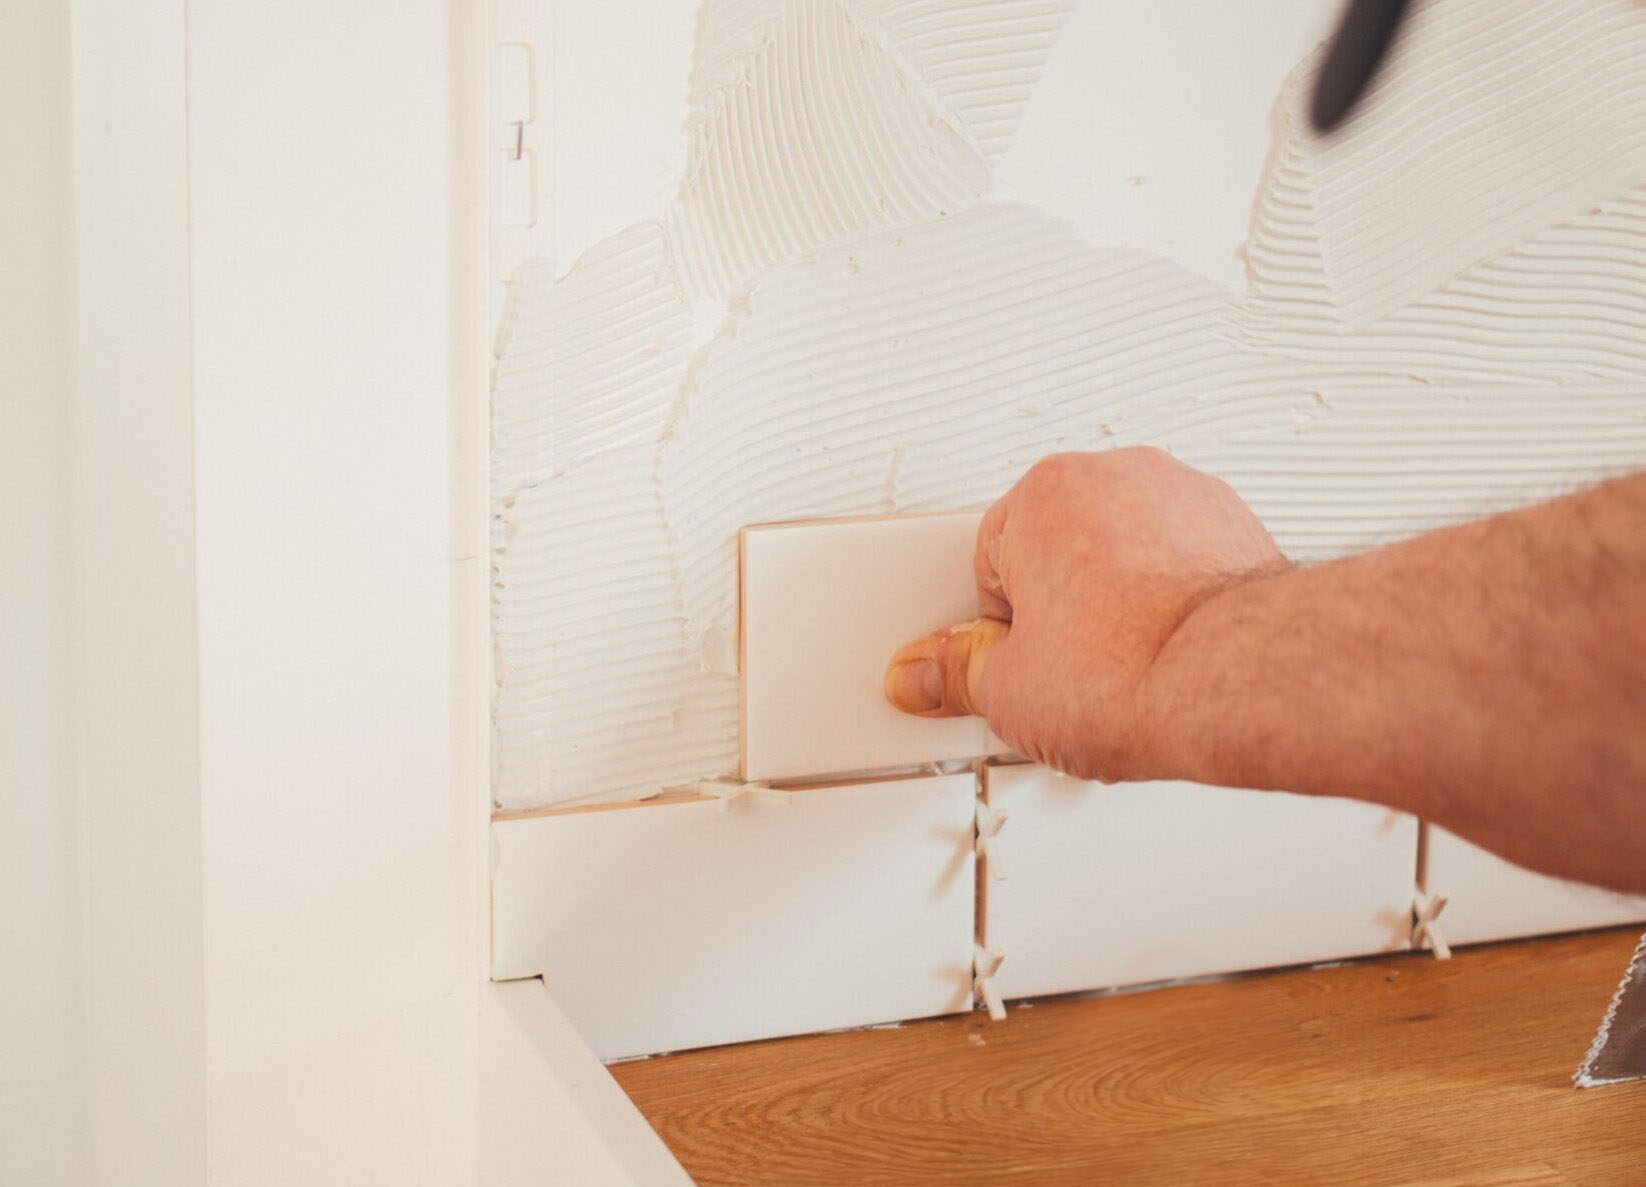 A person installing tiles to a wall